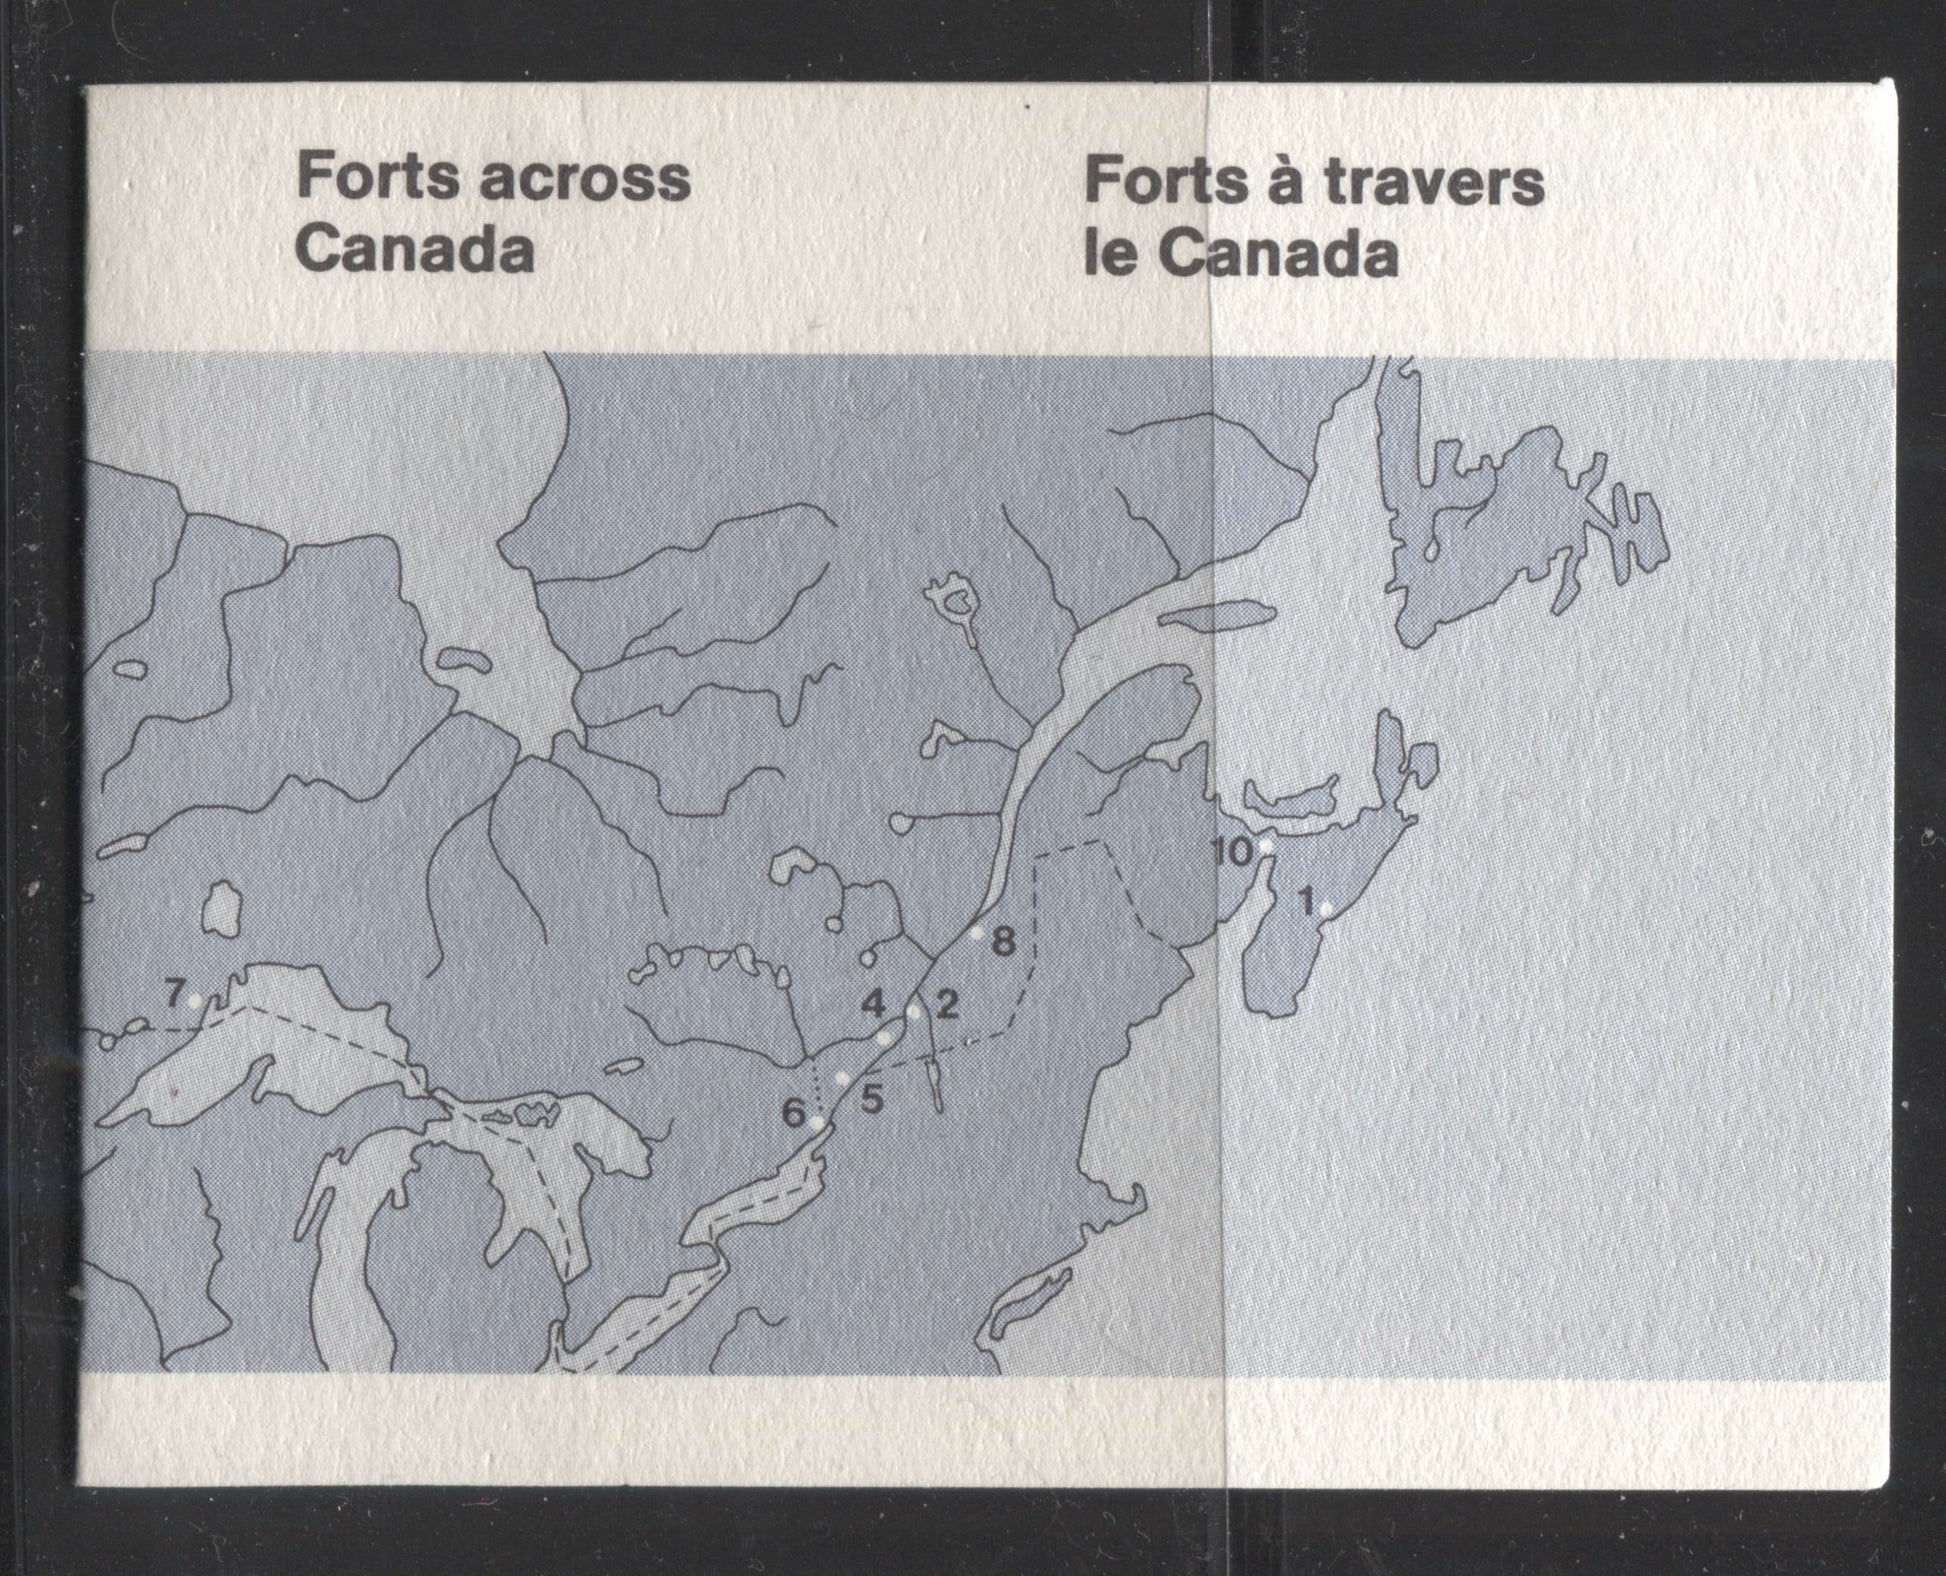 Canada #BK86 1983 Canadian Forts Issue, Complete $3.20 Booklet, Coated Abitibi Paper, Low Fluorescent Paper, 4 mm GT-2 Tagging Brixton Chrome 